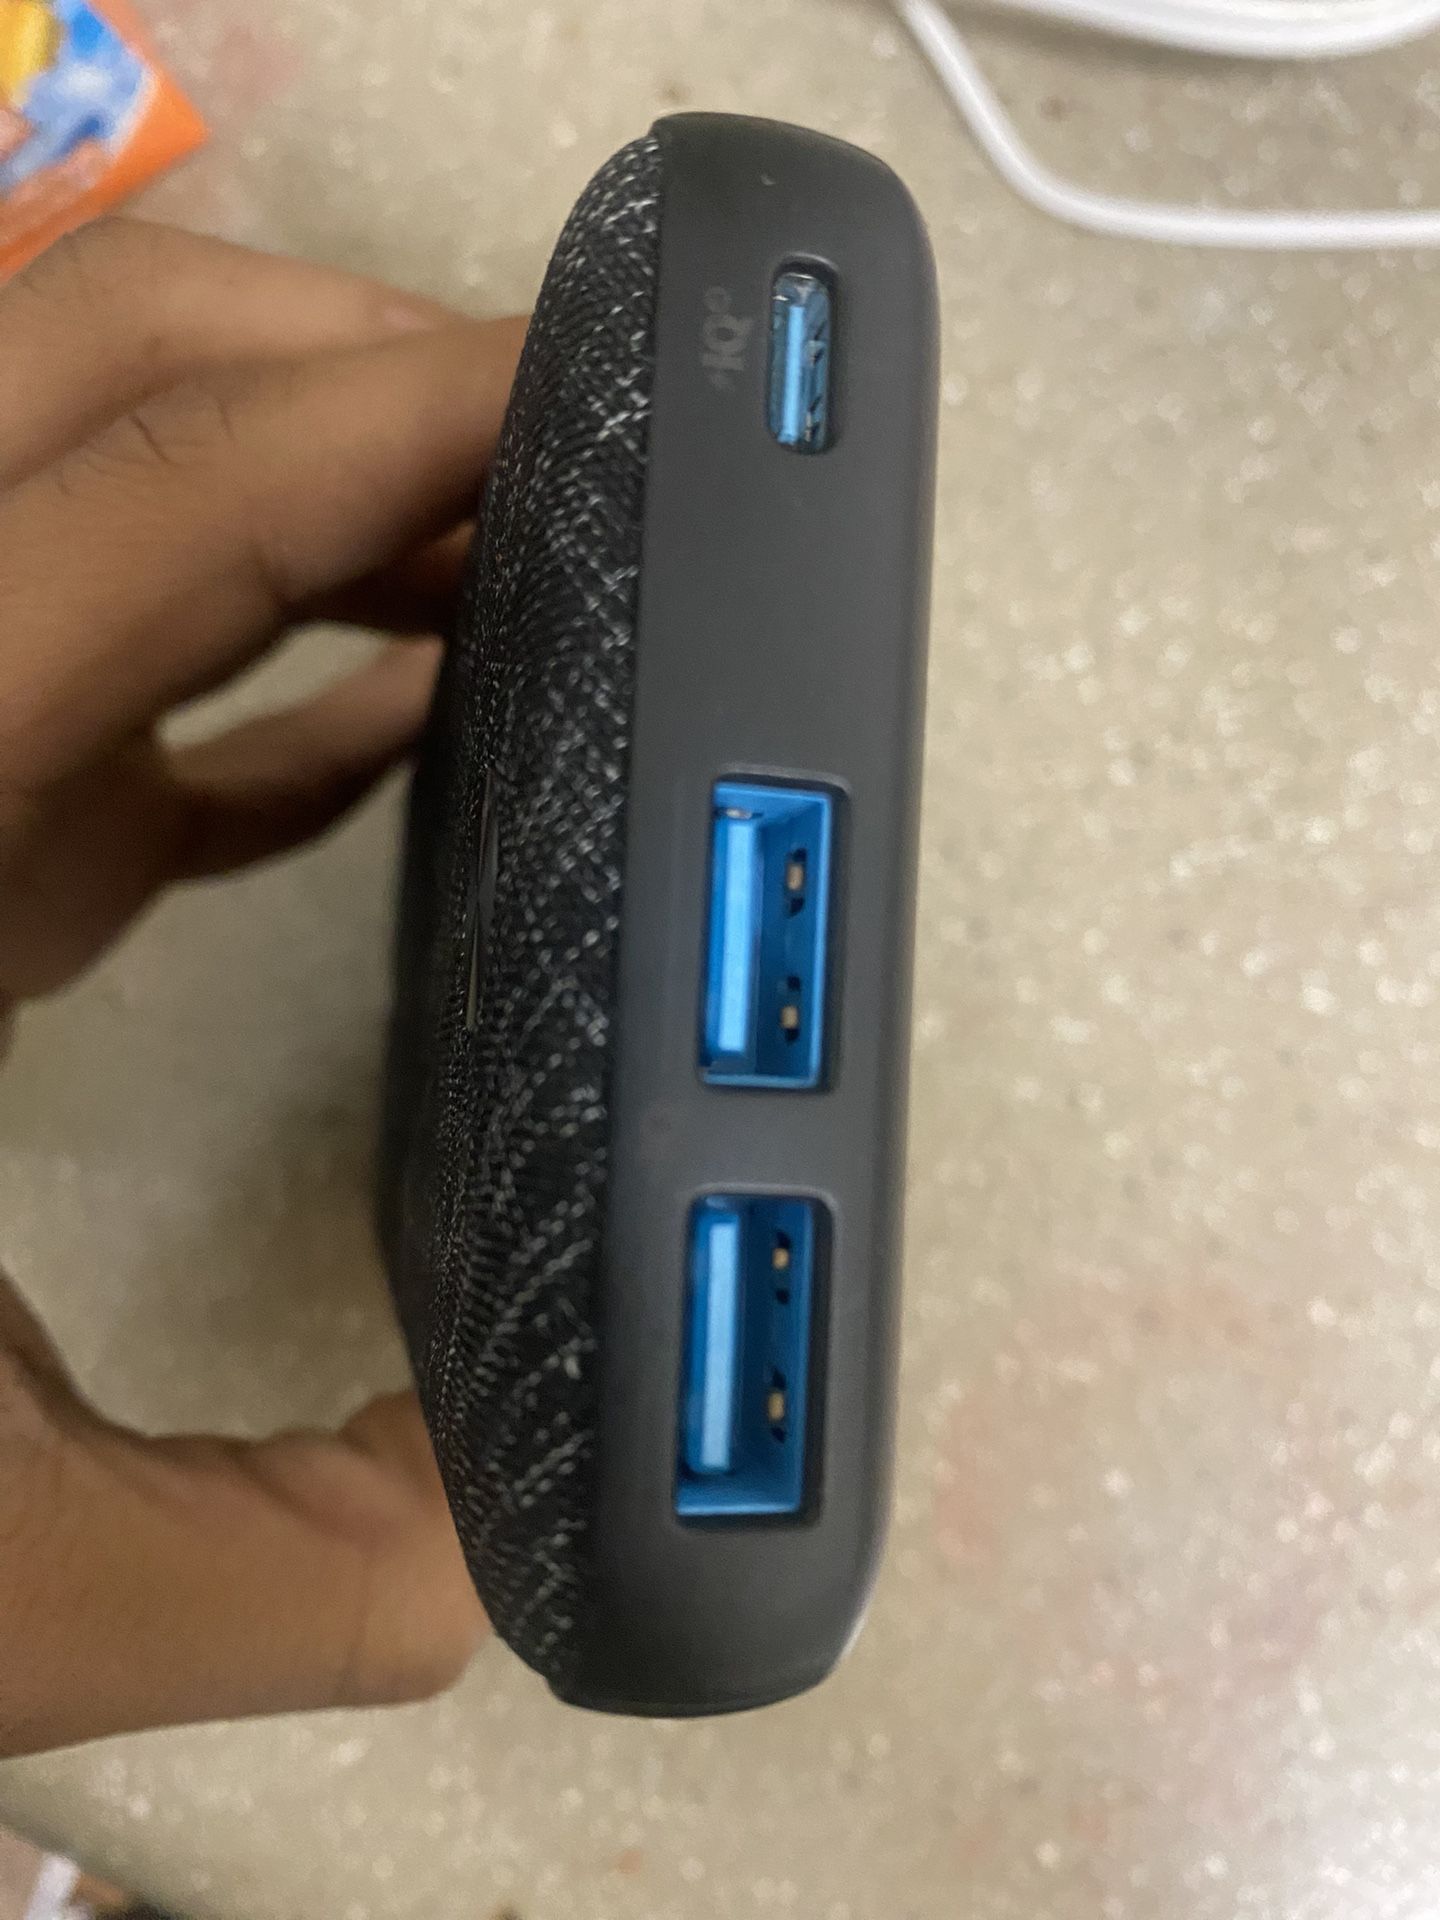 Anker Portable Charger 